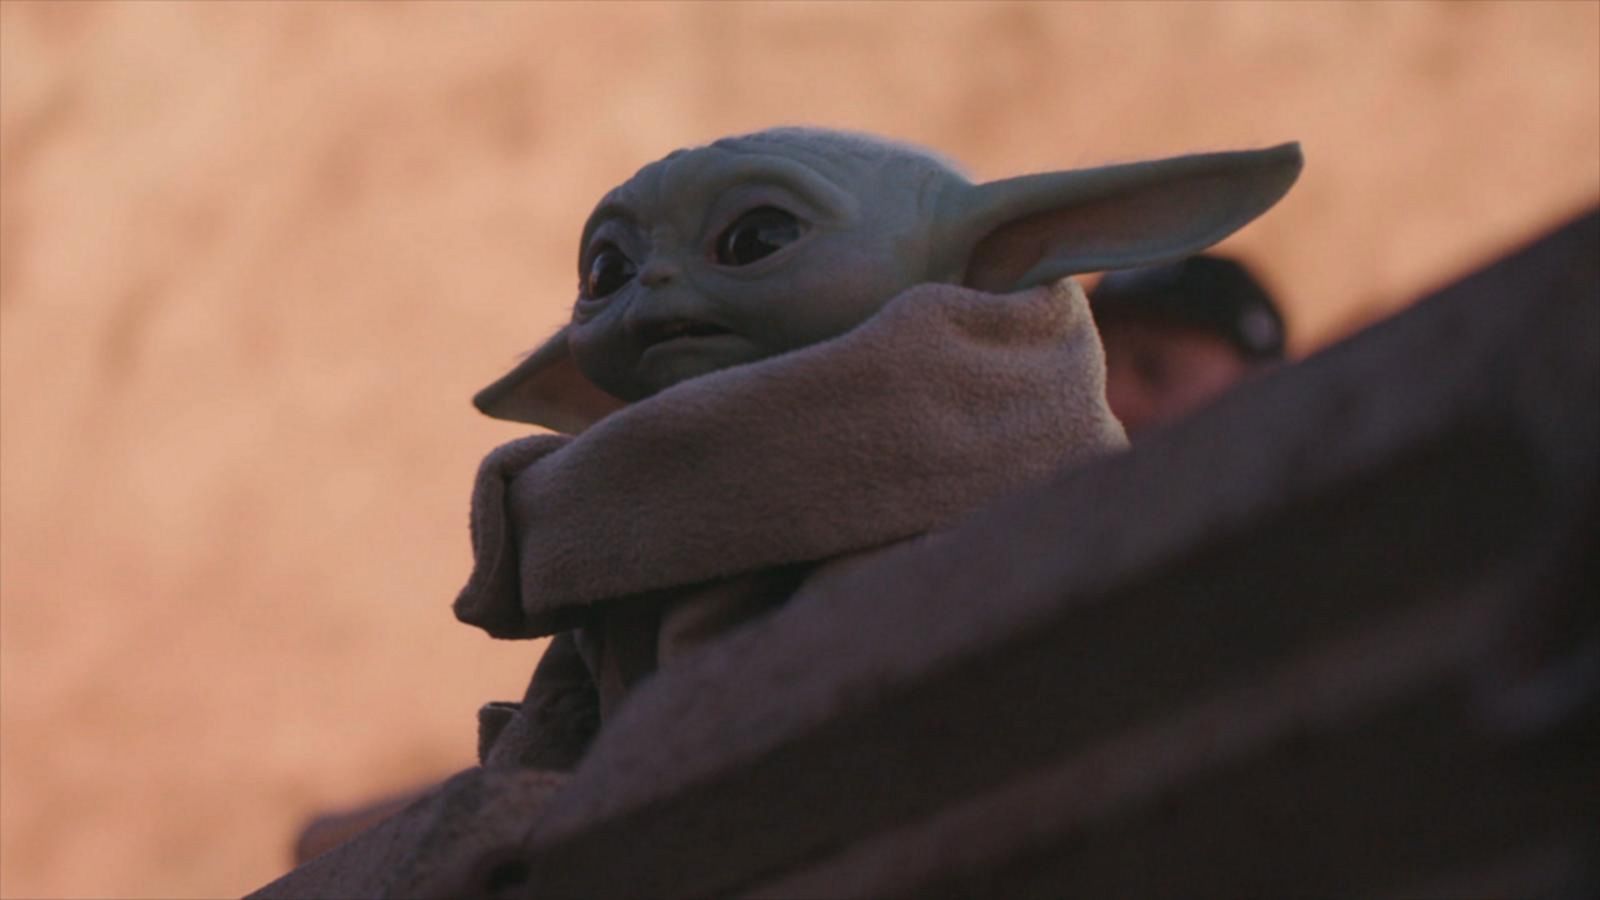 The Mandalorian' may never reveal Baby Yoda's true origins. But Native  Americans already know.